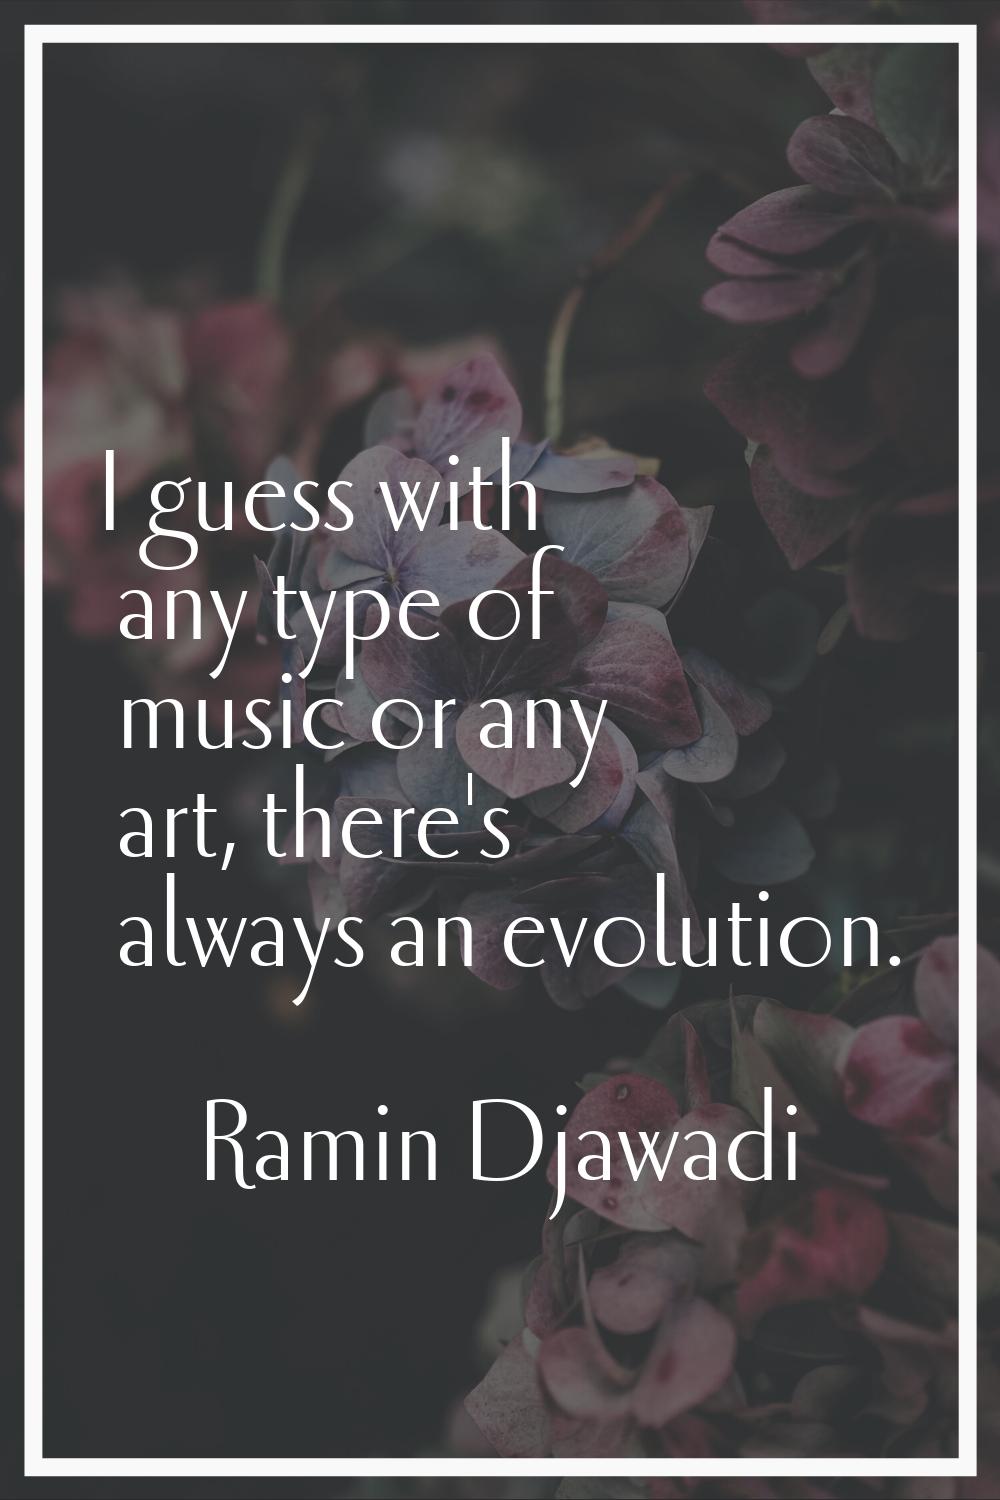 I guess with any type of music or any art, there's always an evolution.